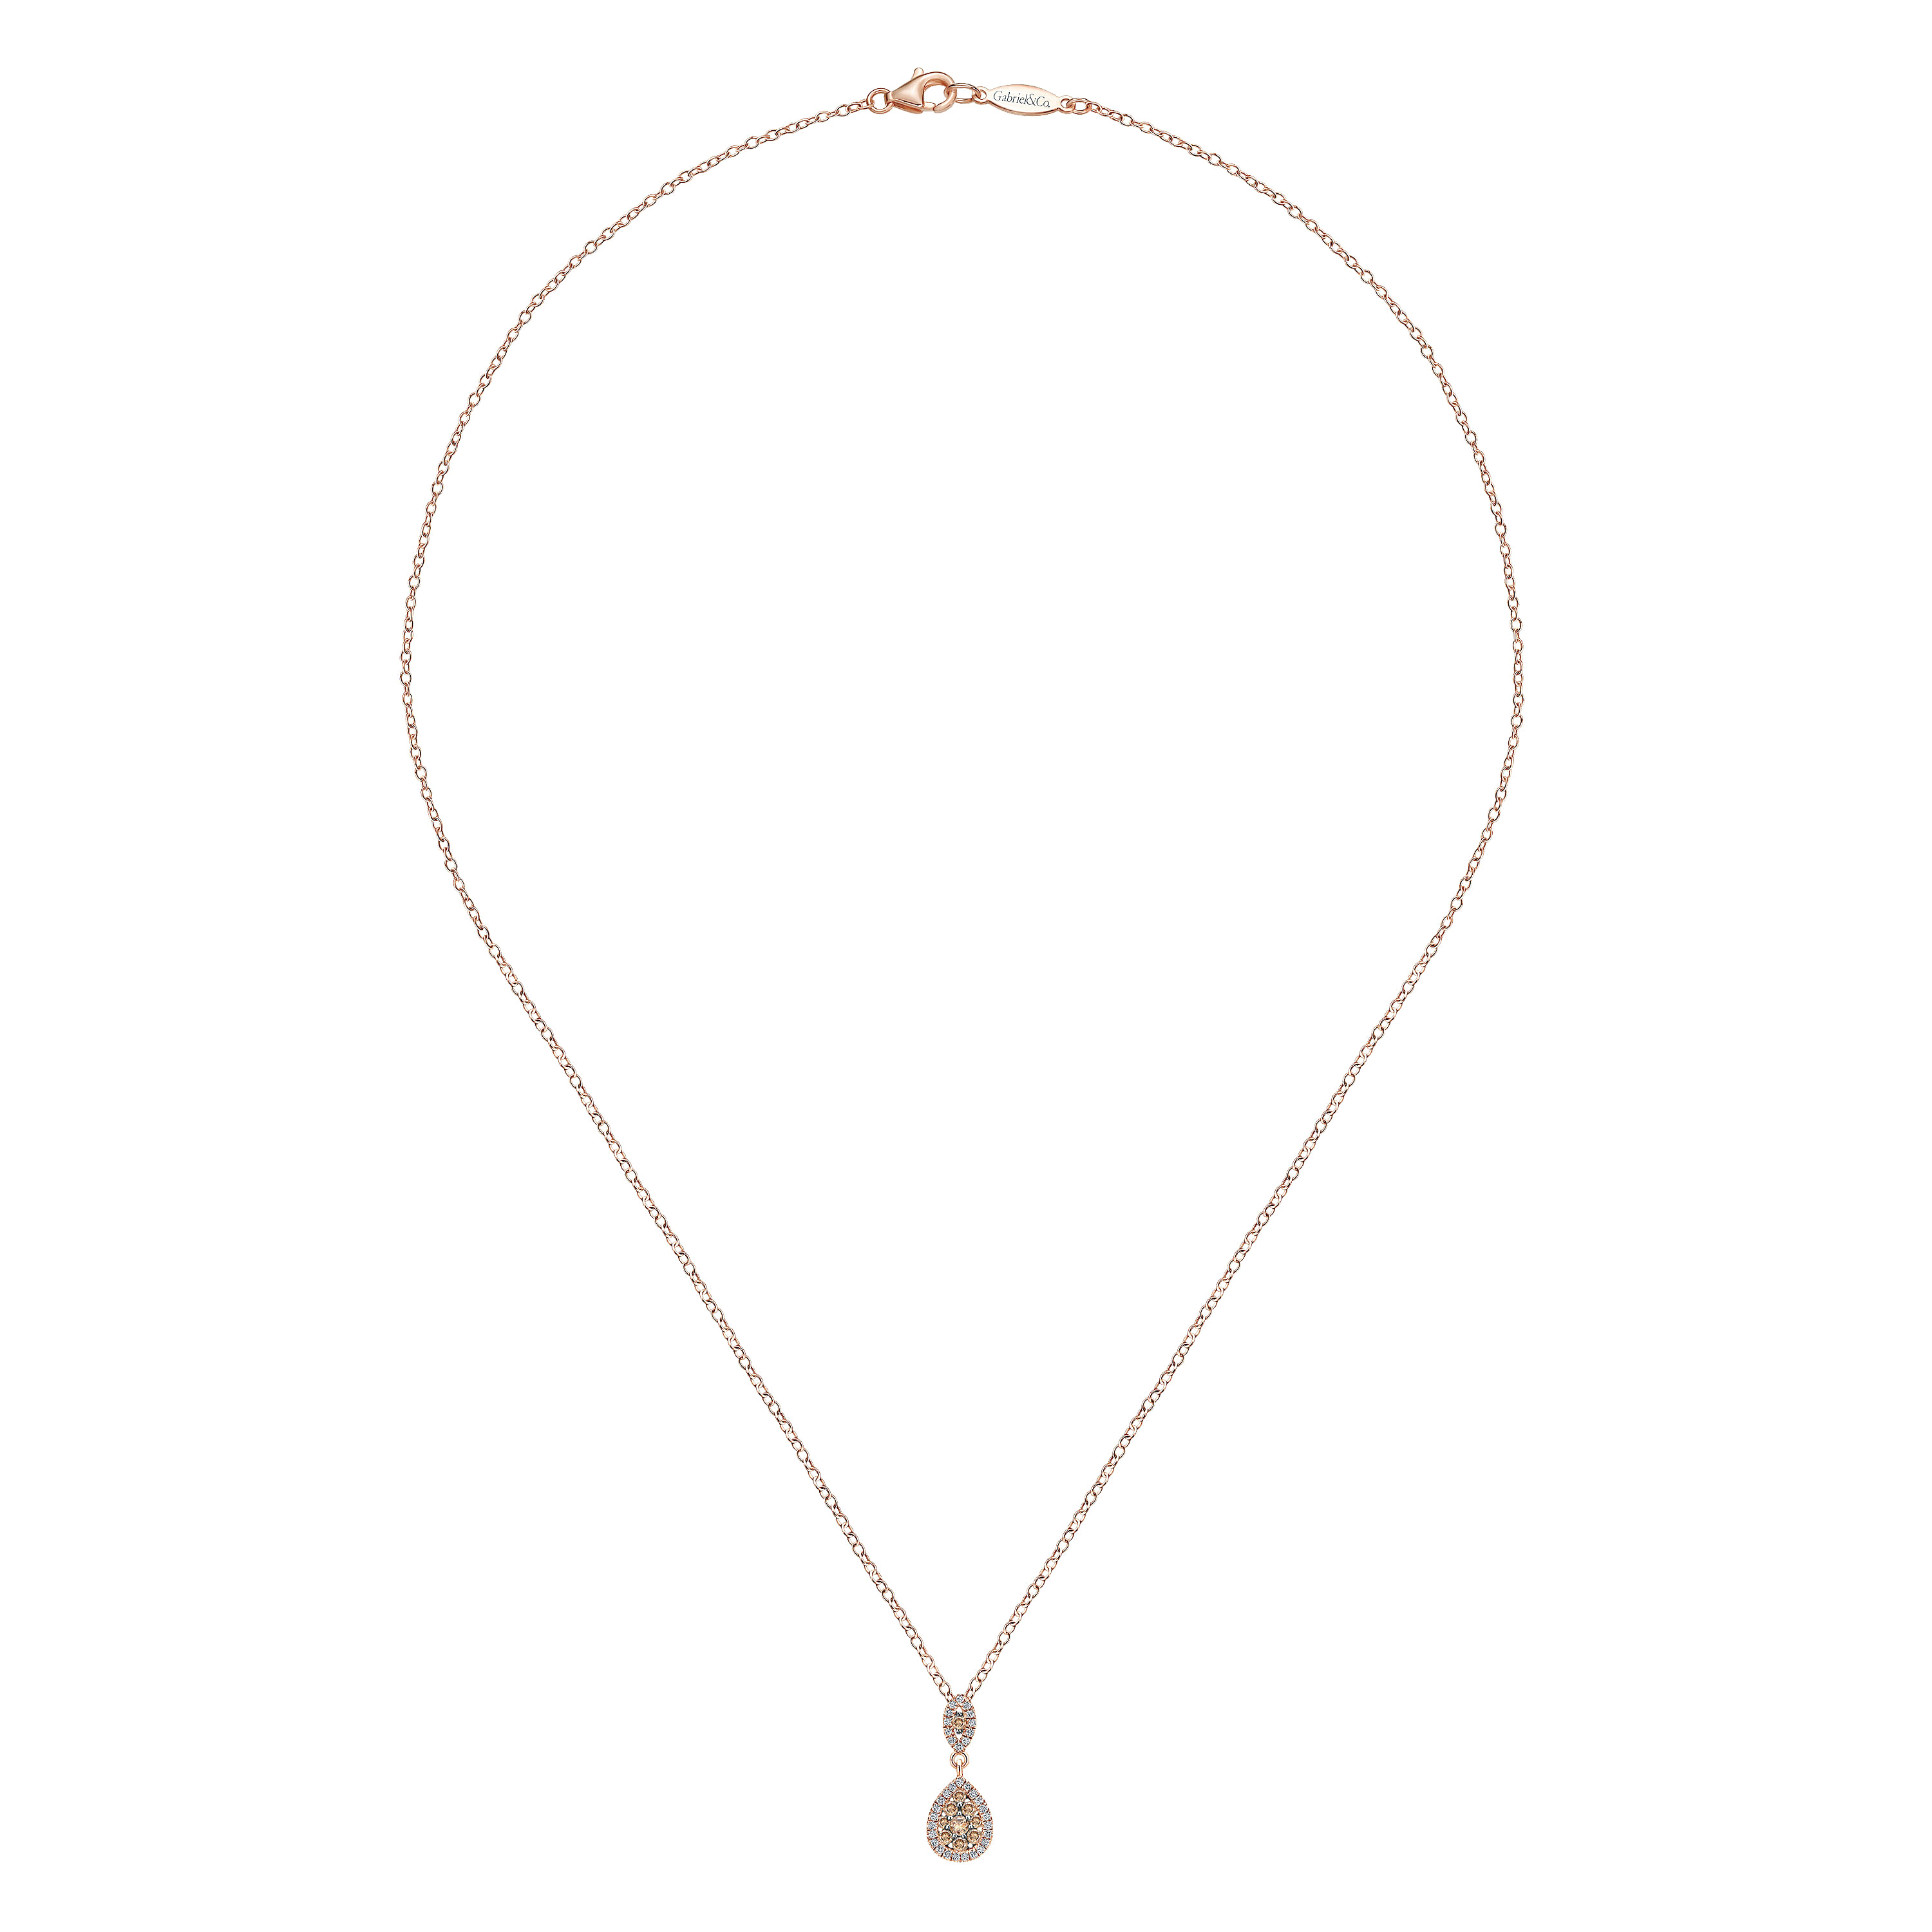 18 inch 14K Rose Gold Champagne and White Diamond Fashion Necklace